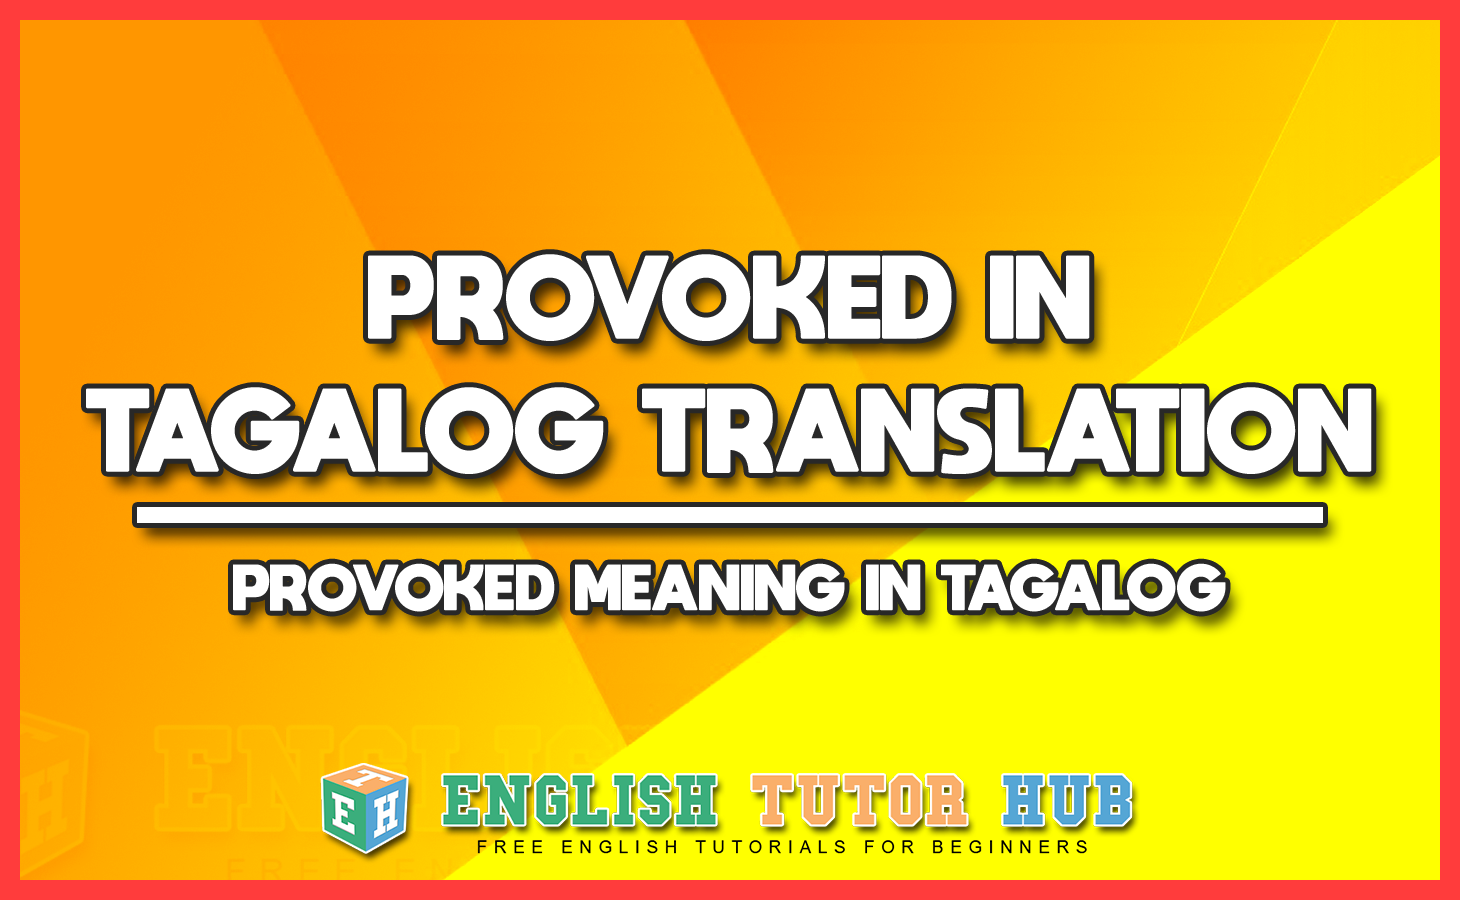 PROVOKED IN TAGALOG TRANSLATION - PROVOKED MEANING IN TAGALOG